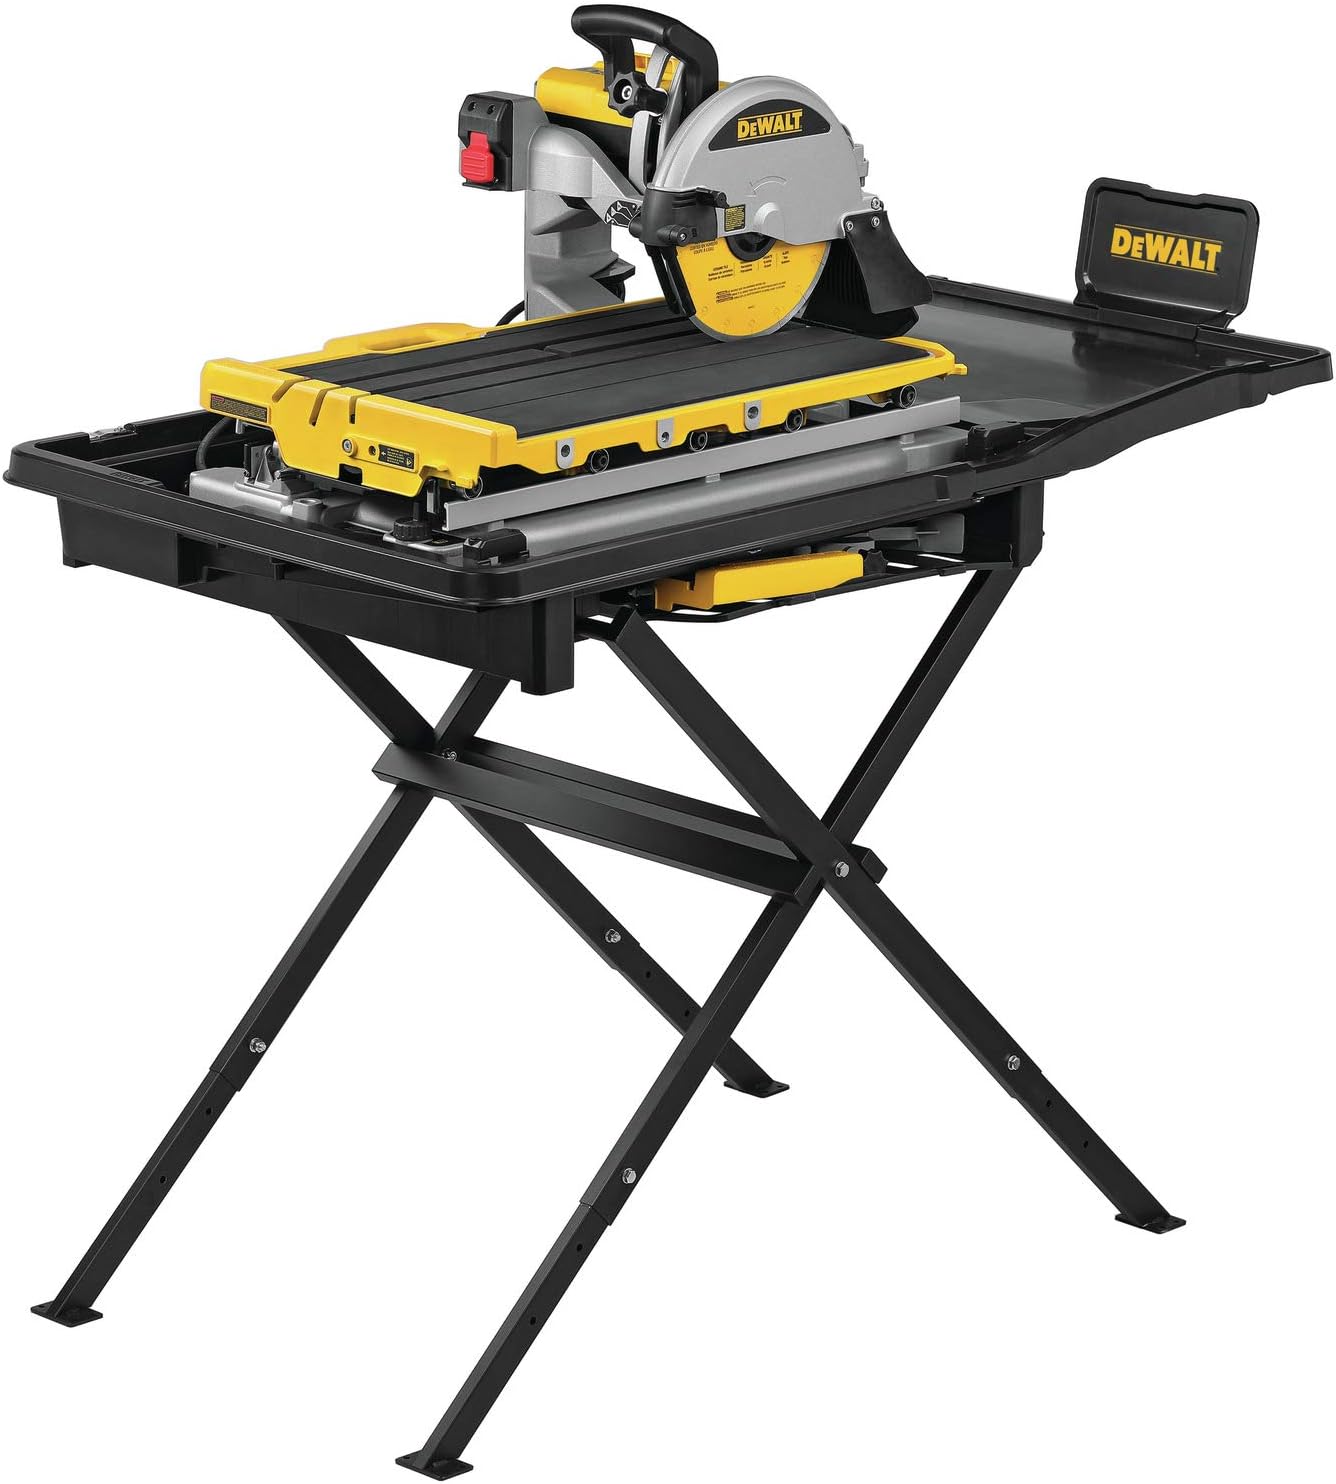 DEWALT Wet Tile Saw with Stand, 10 Inch, 15-Amp, 1,220 [...]